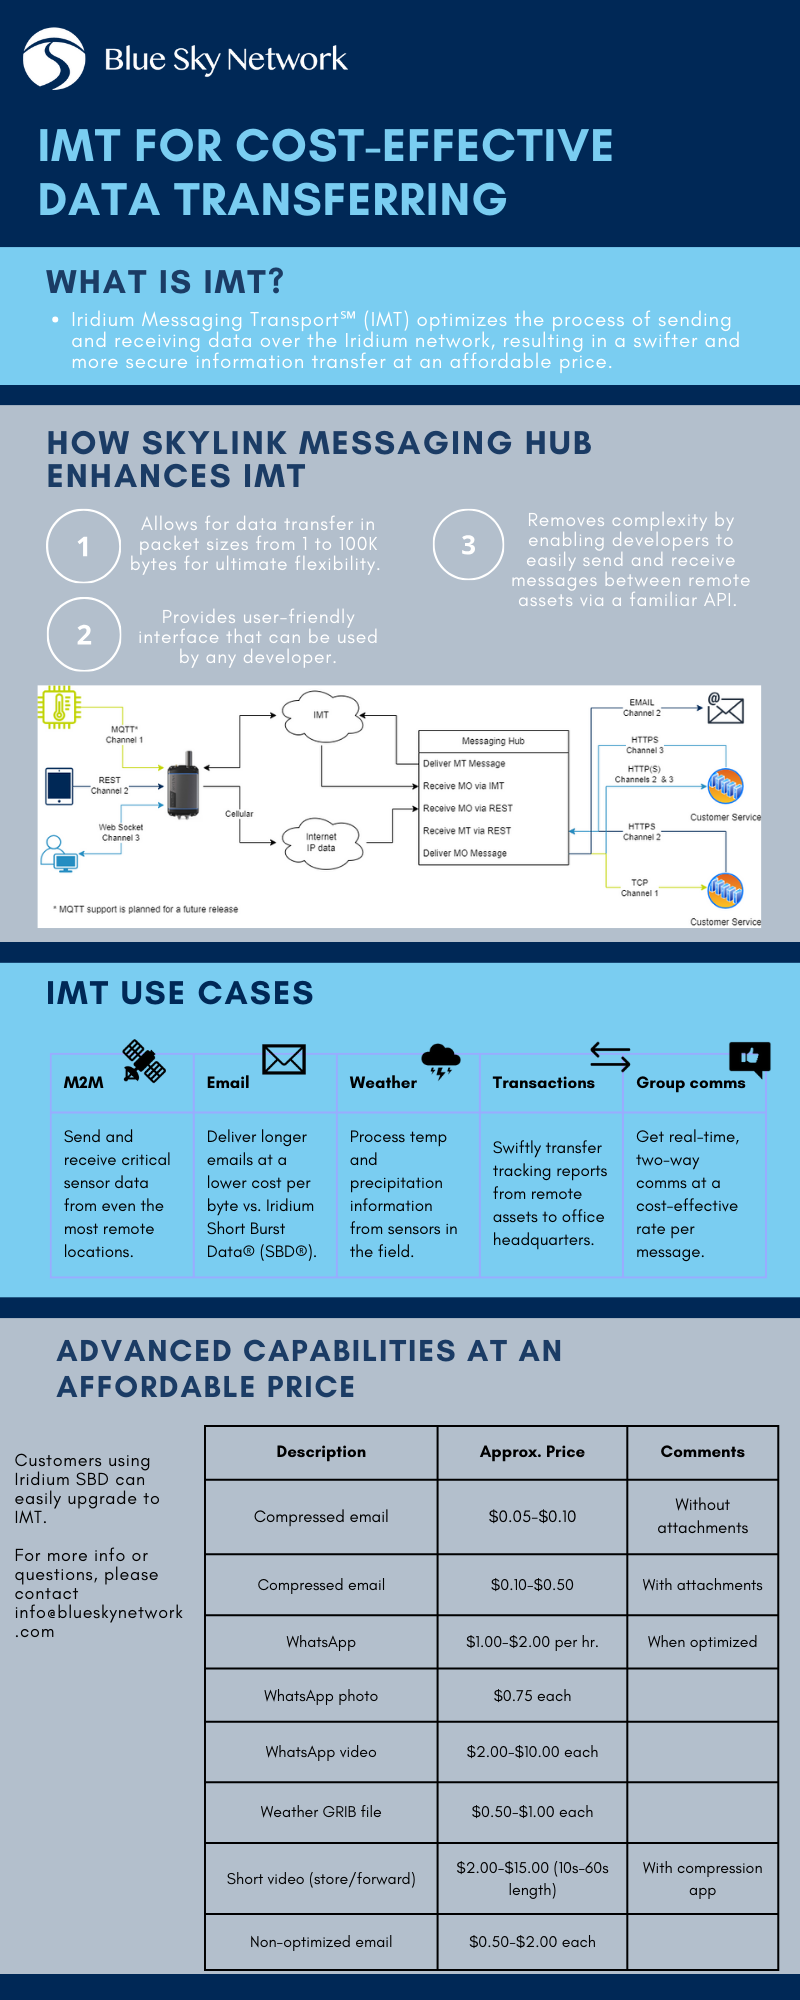 IMT for Cost-Effective Data Transferring